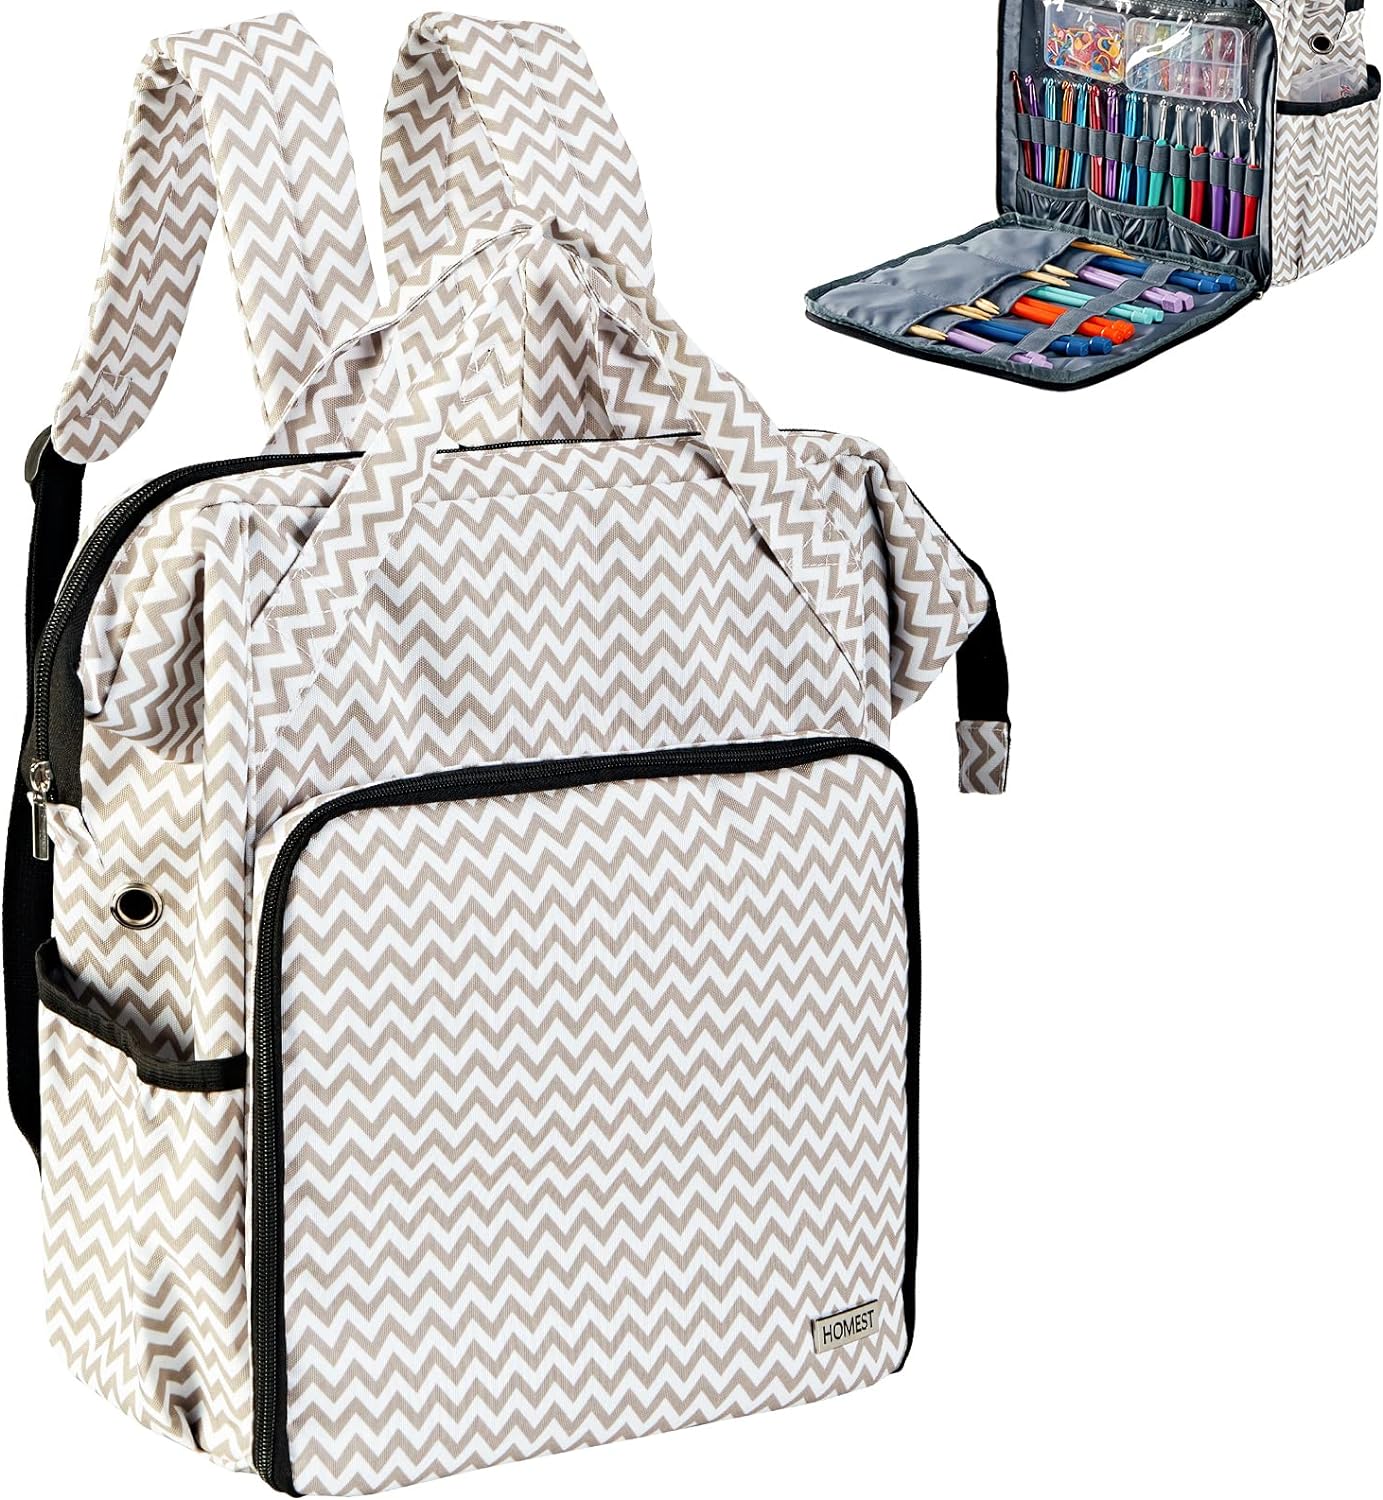 HOMEST Yarn Storage Backpack with Customized Front Compartment for Crochet Hooks, Needles and Accessories